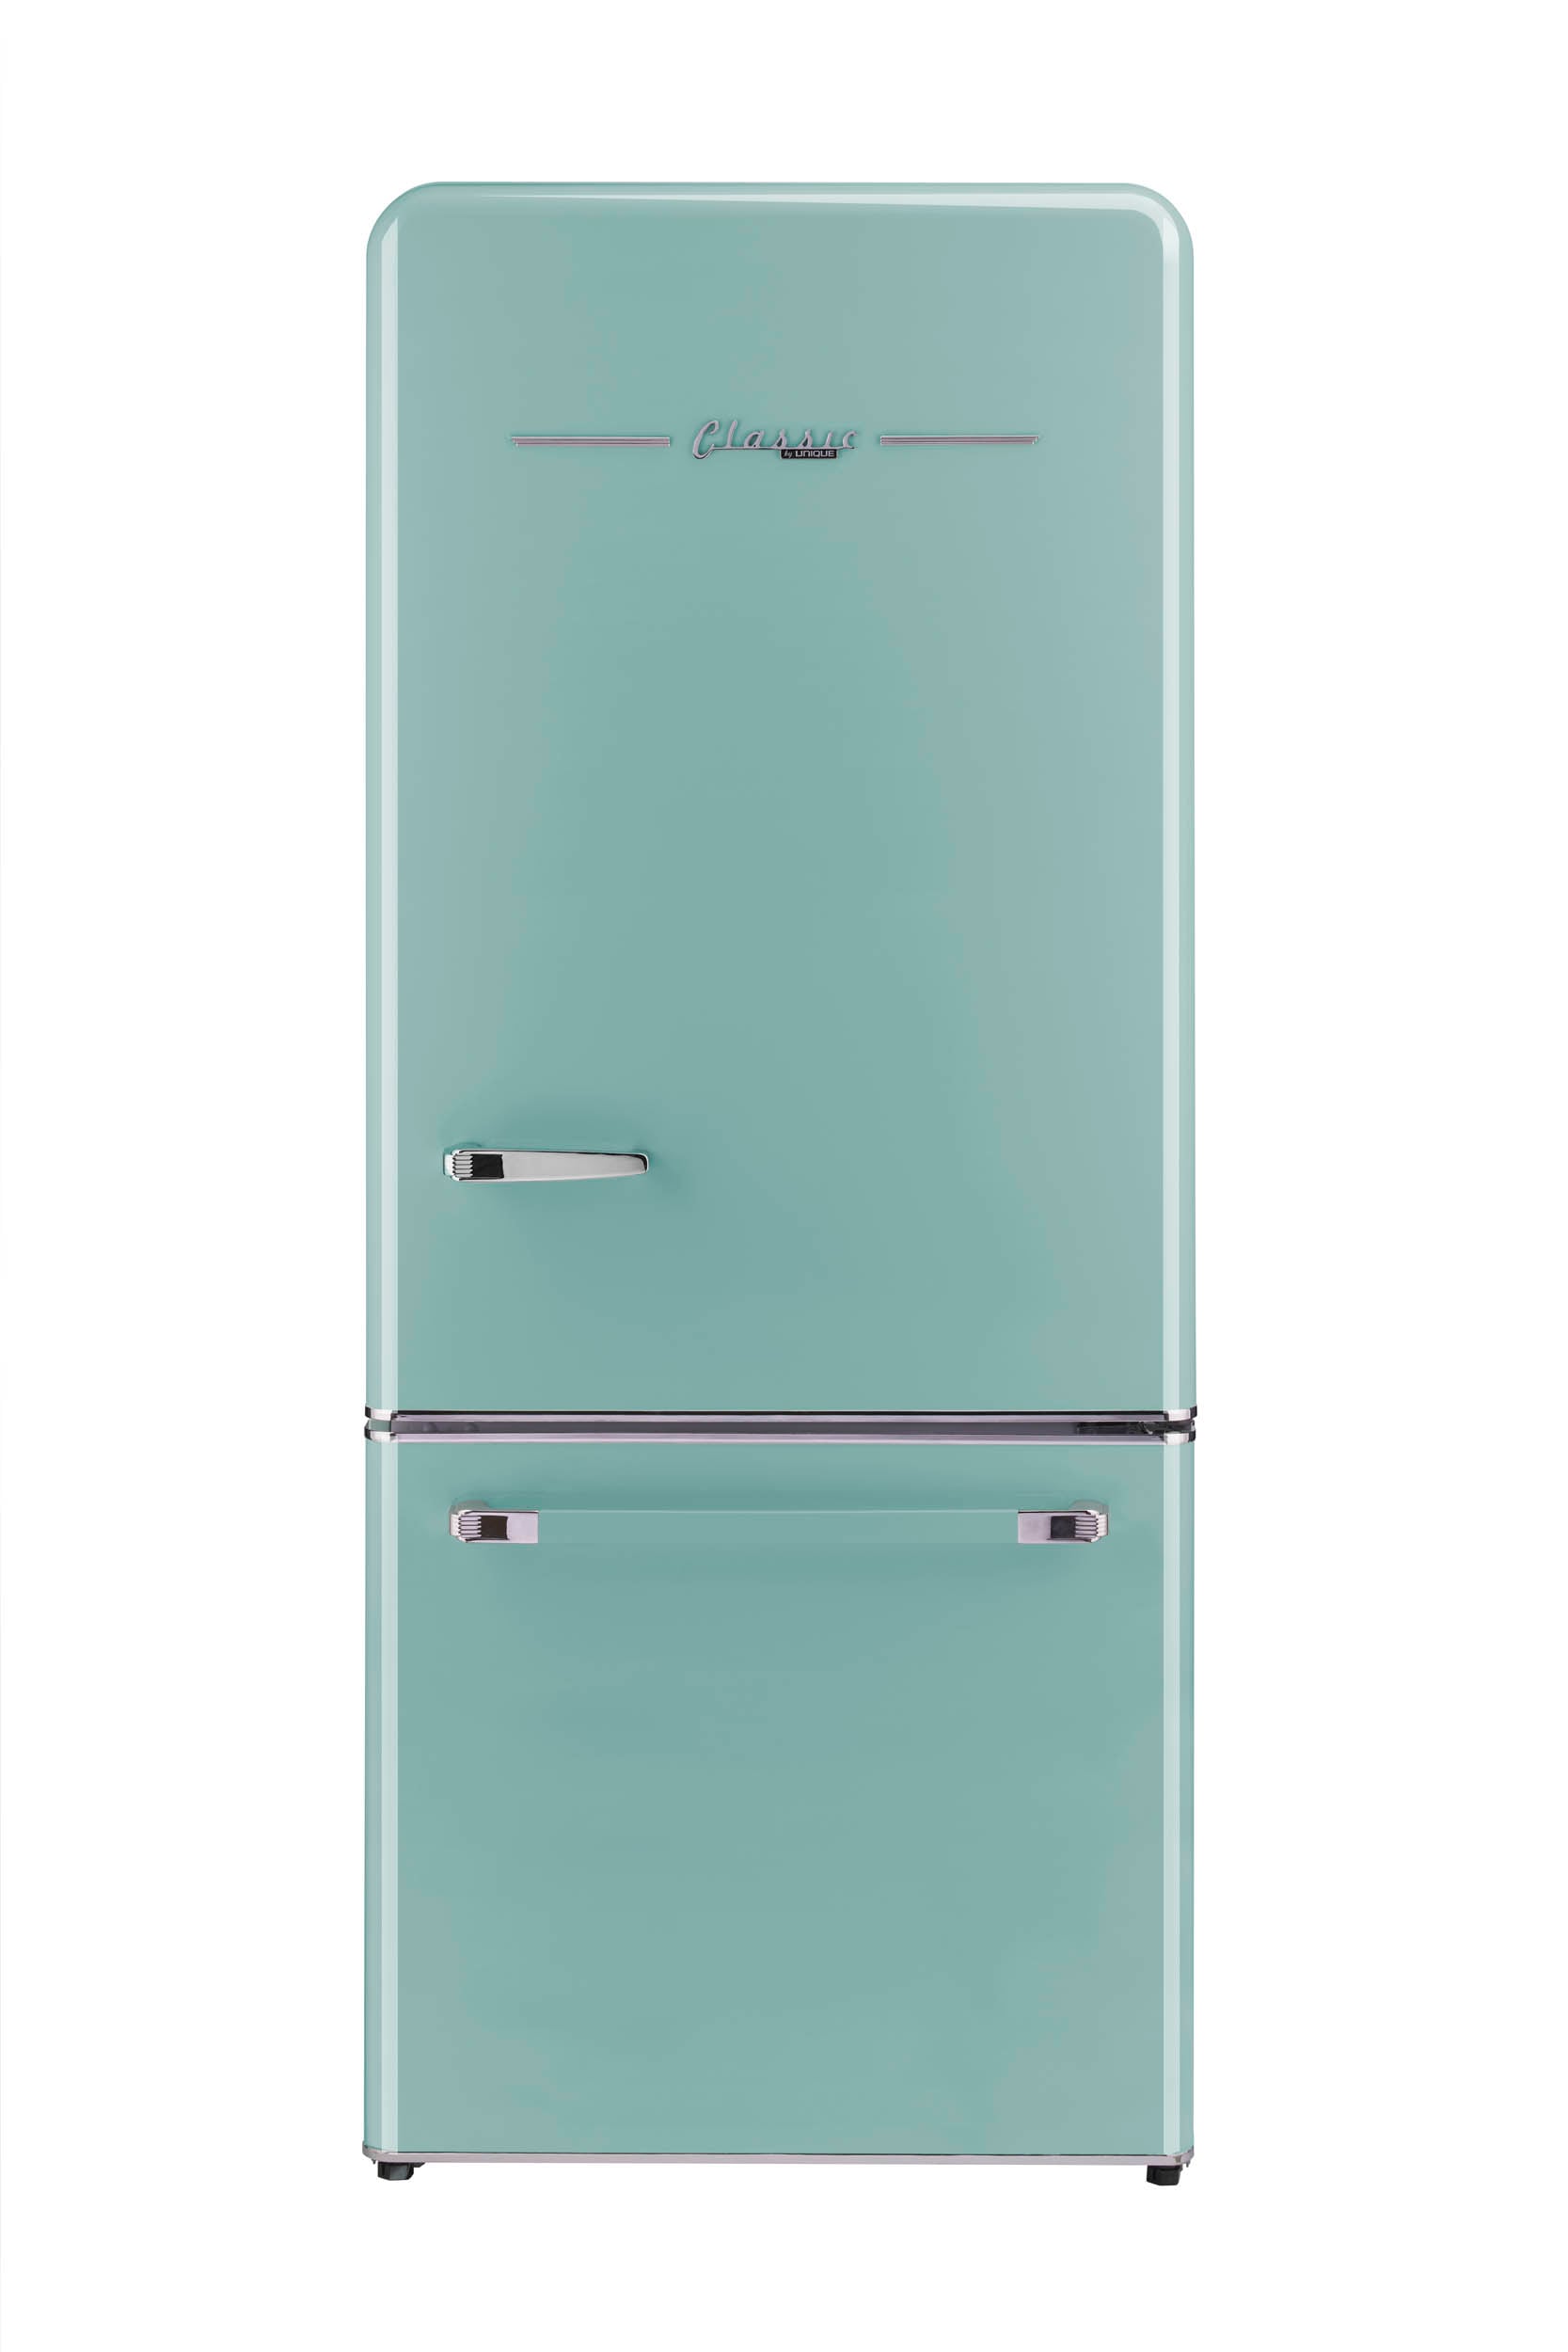 UNIQUE Classic Retro 17.7-cu ft Counter-depth Bottom-Freezer Refrigerator  with Ice Maker (Ocean Mist Turquoise) ENERGY STAR in the Bottom-Freezer  Refrigerators department at